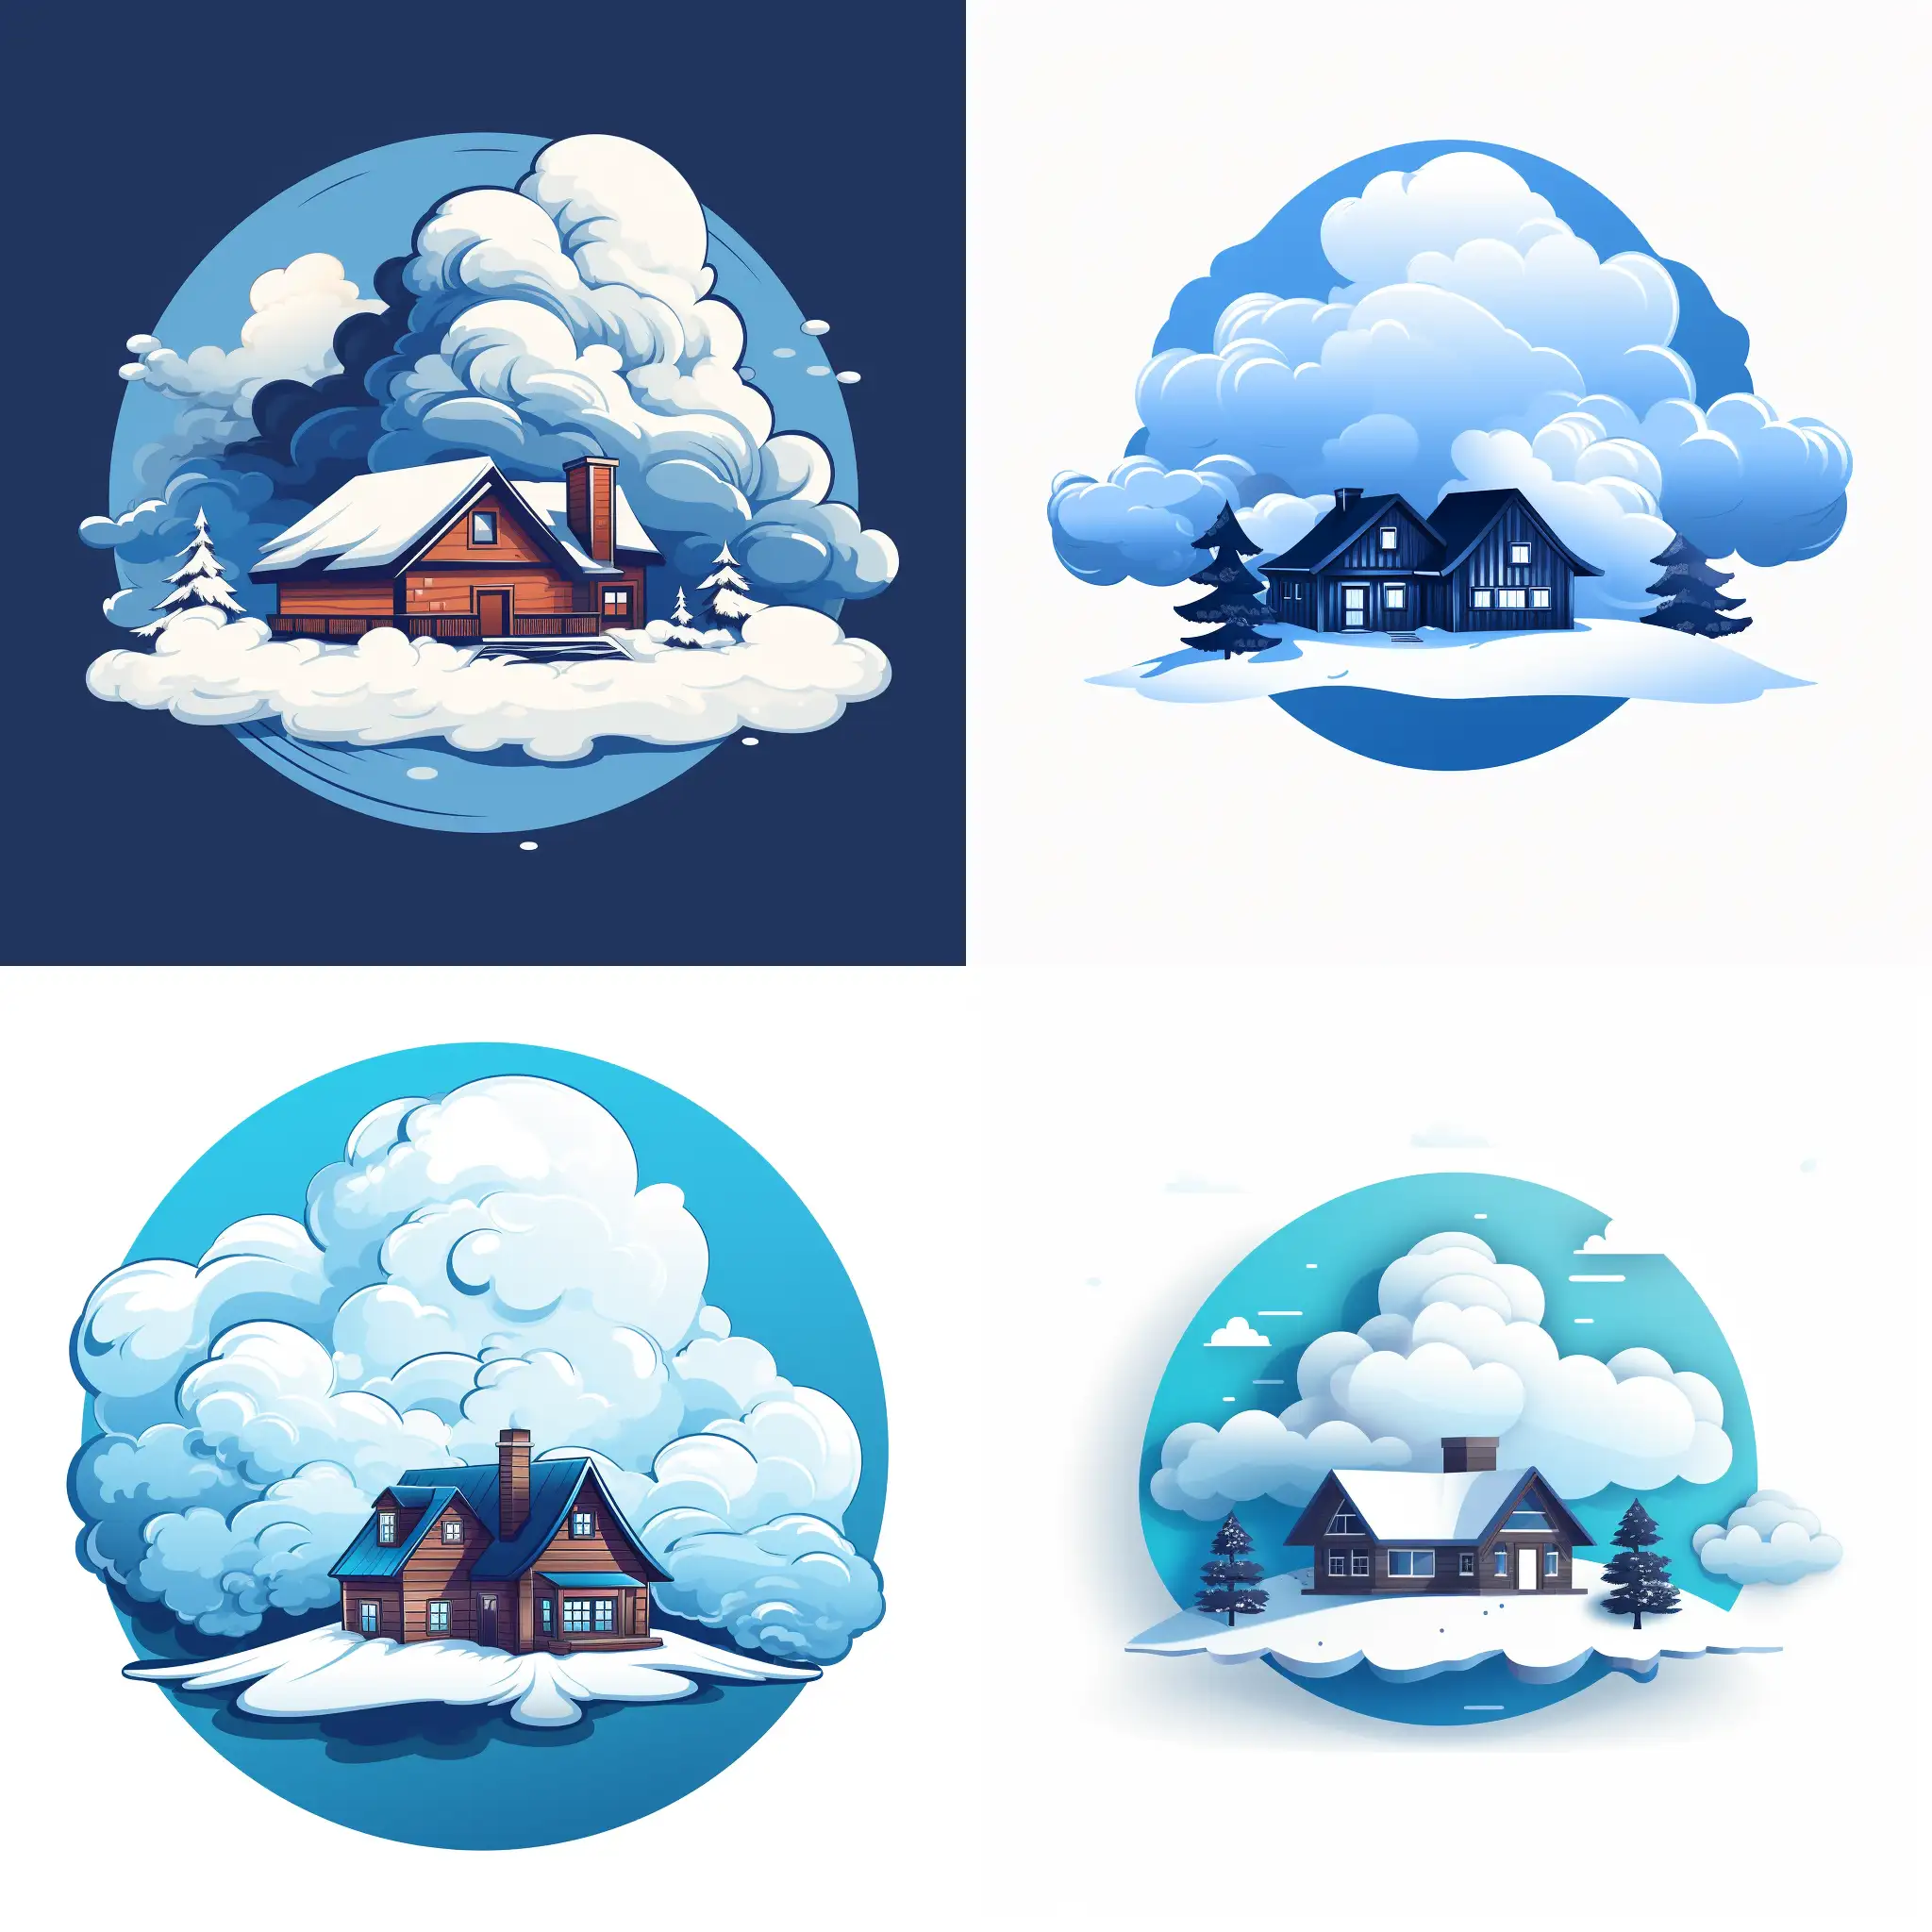 Siberian-Style-House-in-Binary-Cloud-amidst-Snowstorm